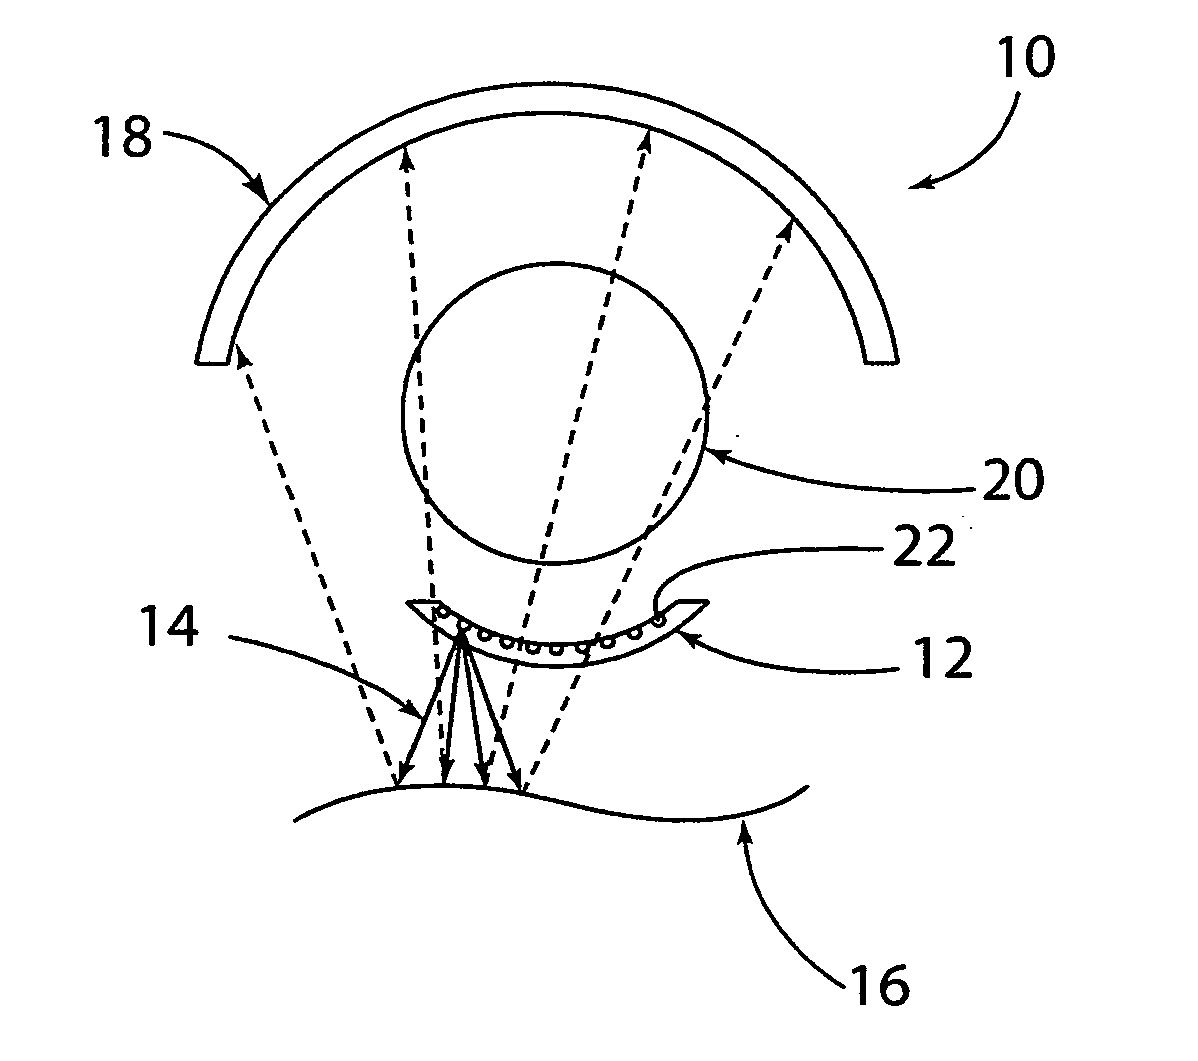 Tomographic imaging system using a conformable mirror